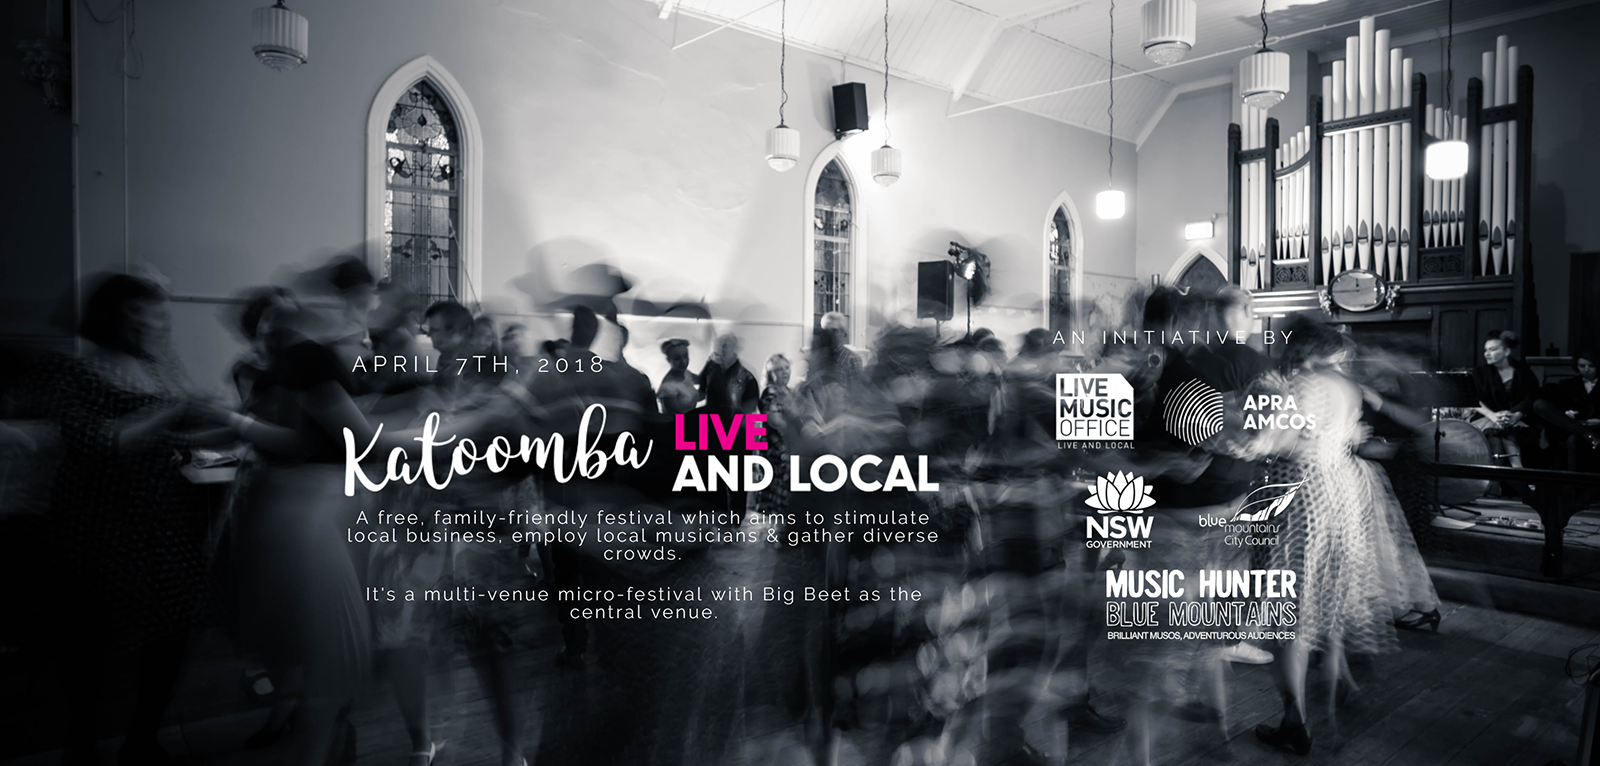 ‘Katoomba Live and Local’ calling local musos - blog post image 